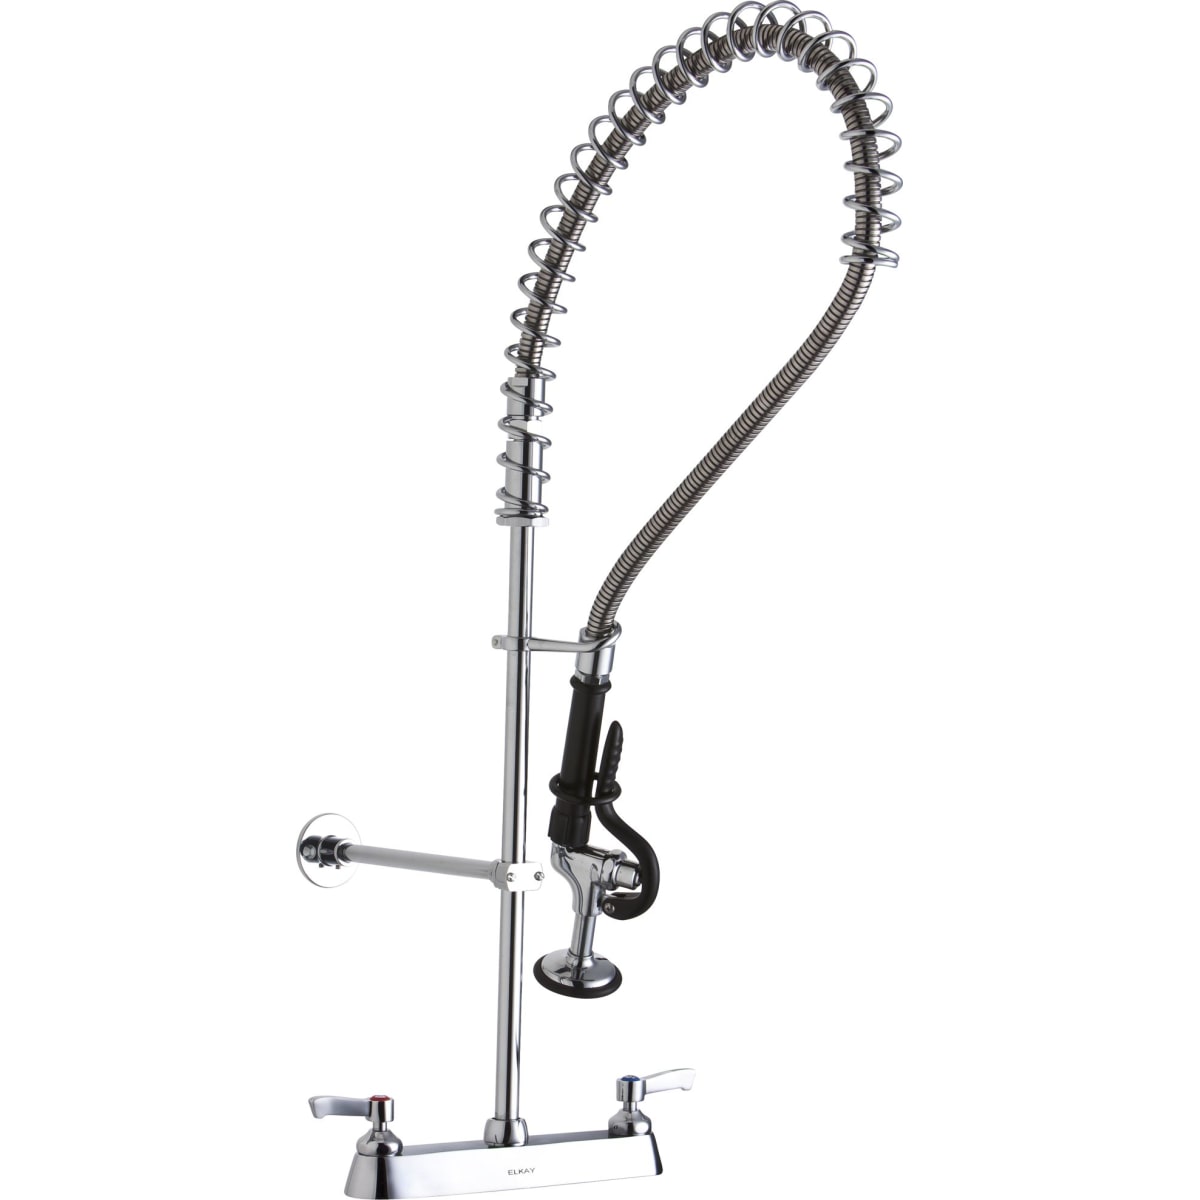 Elkay Lk843lc Chrome Pre Rinse Utility Faucet With Spray Faucet Com